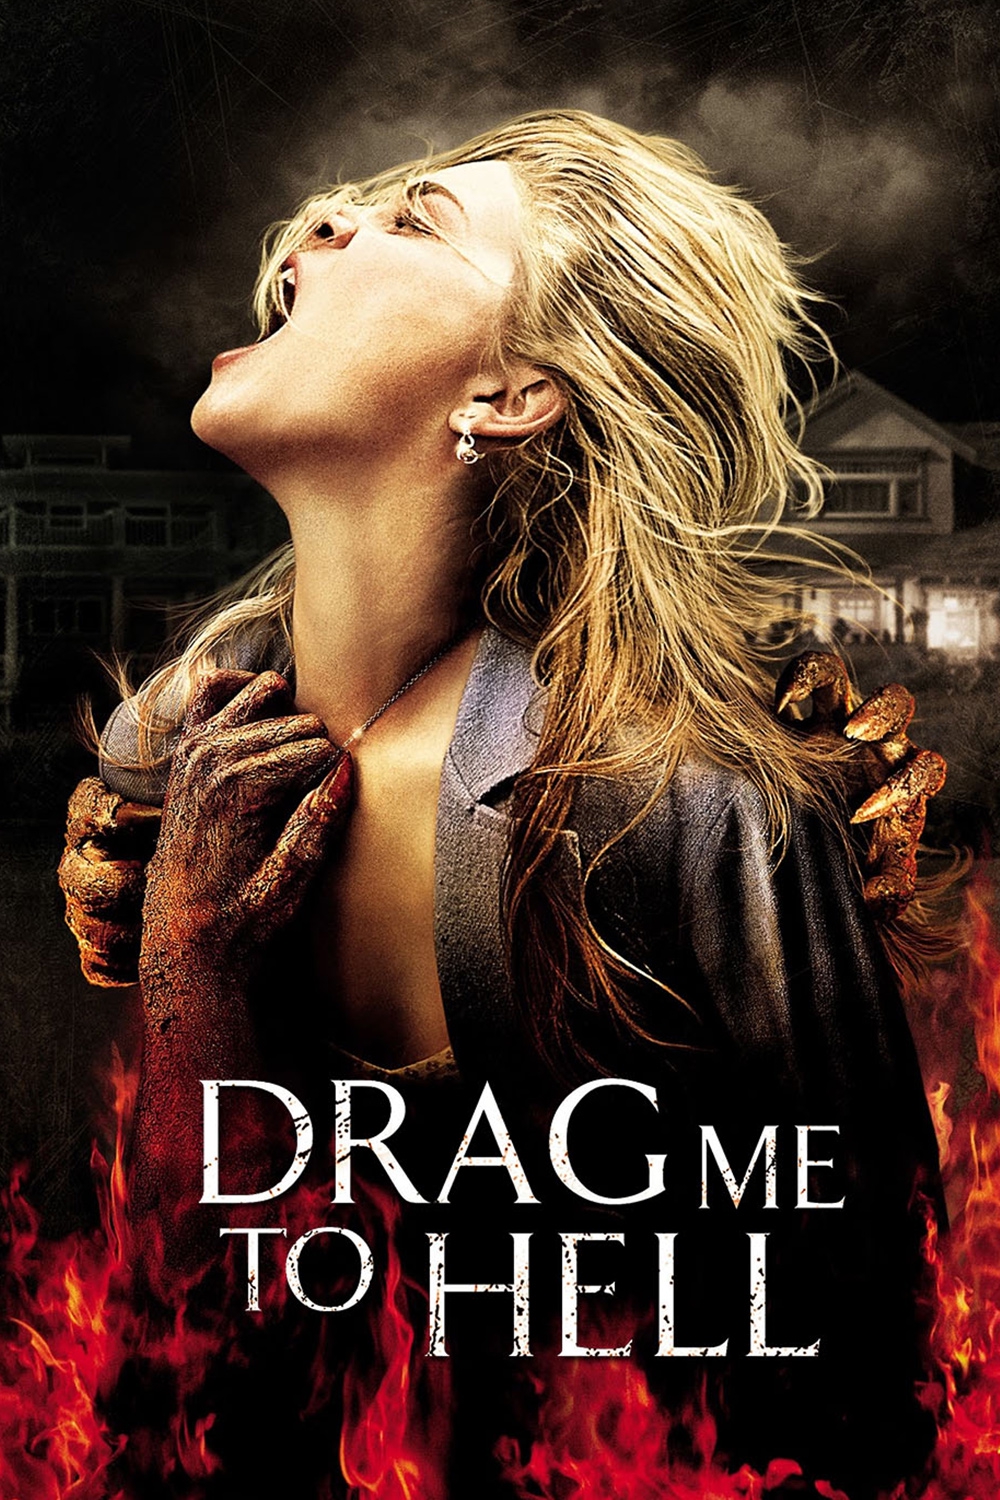 drag me to hell free movie download